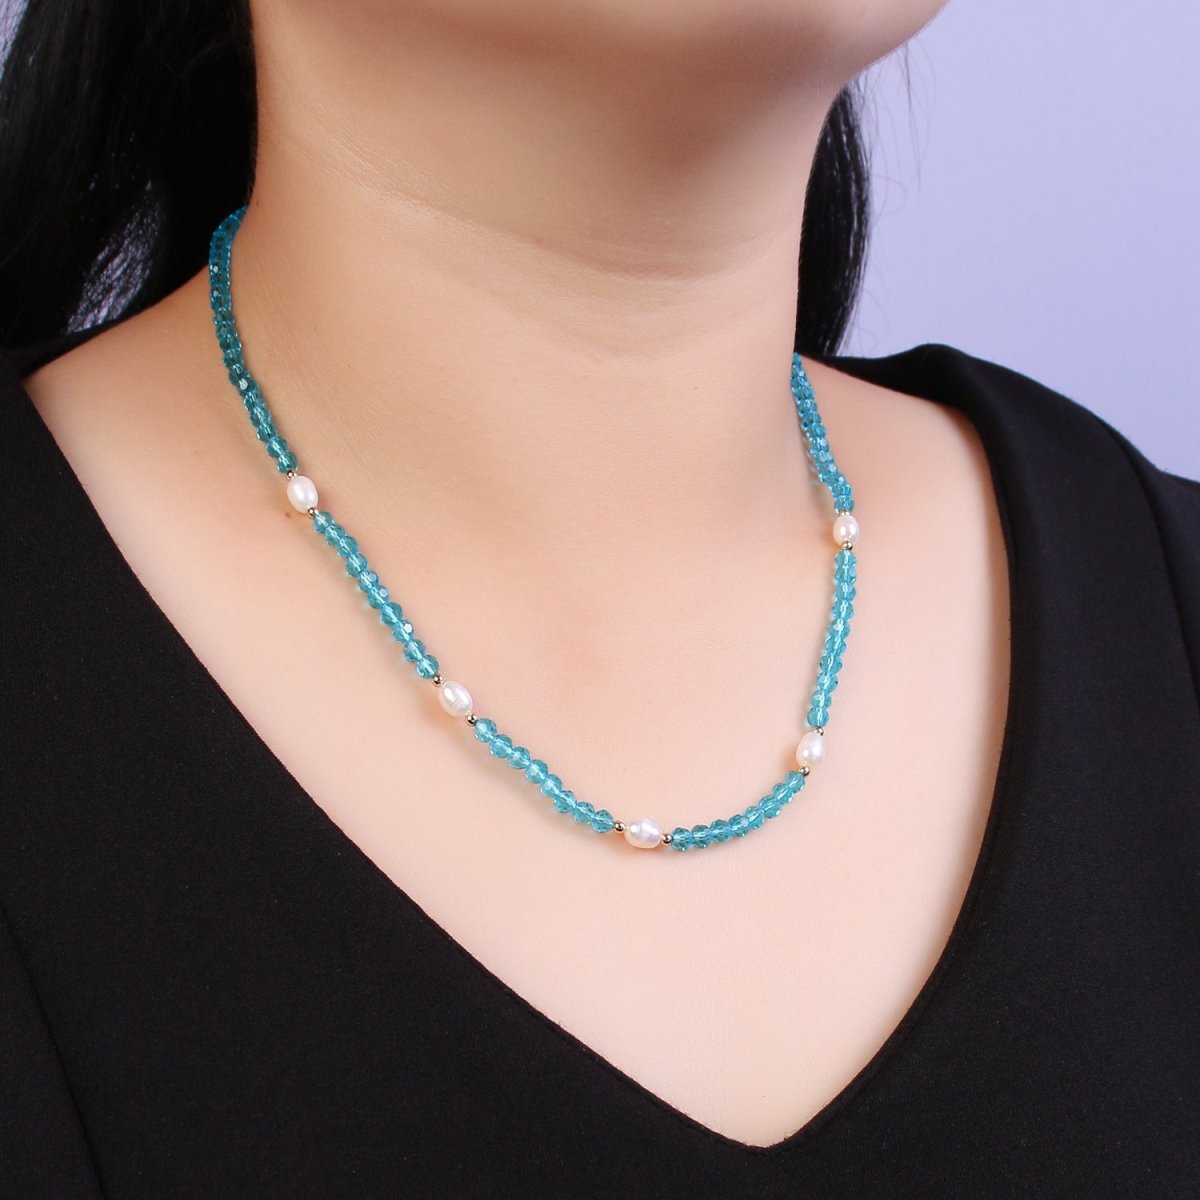 Pearl with Aqua Blue Glass Beaded Necklace, Light Blue Faceted Rondell Beads Necklace | WA-591 Clearance Pricing - DLUXCA